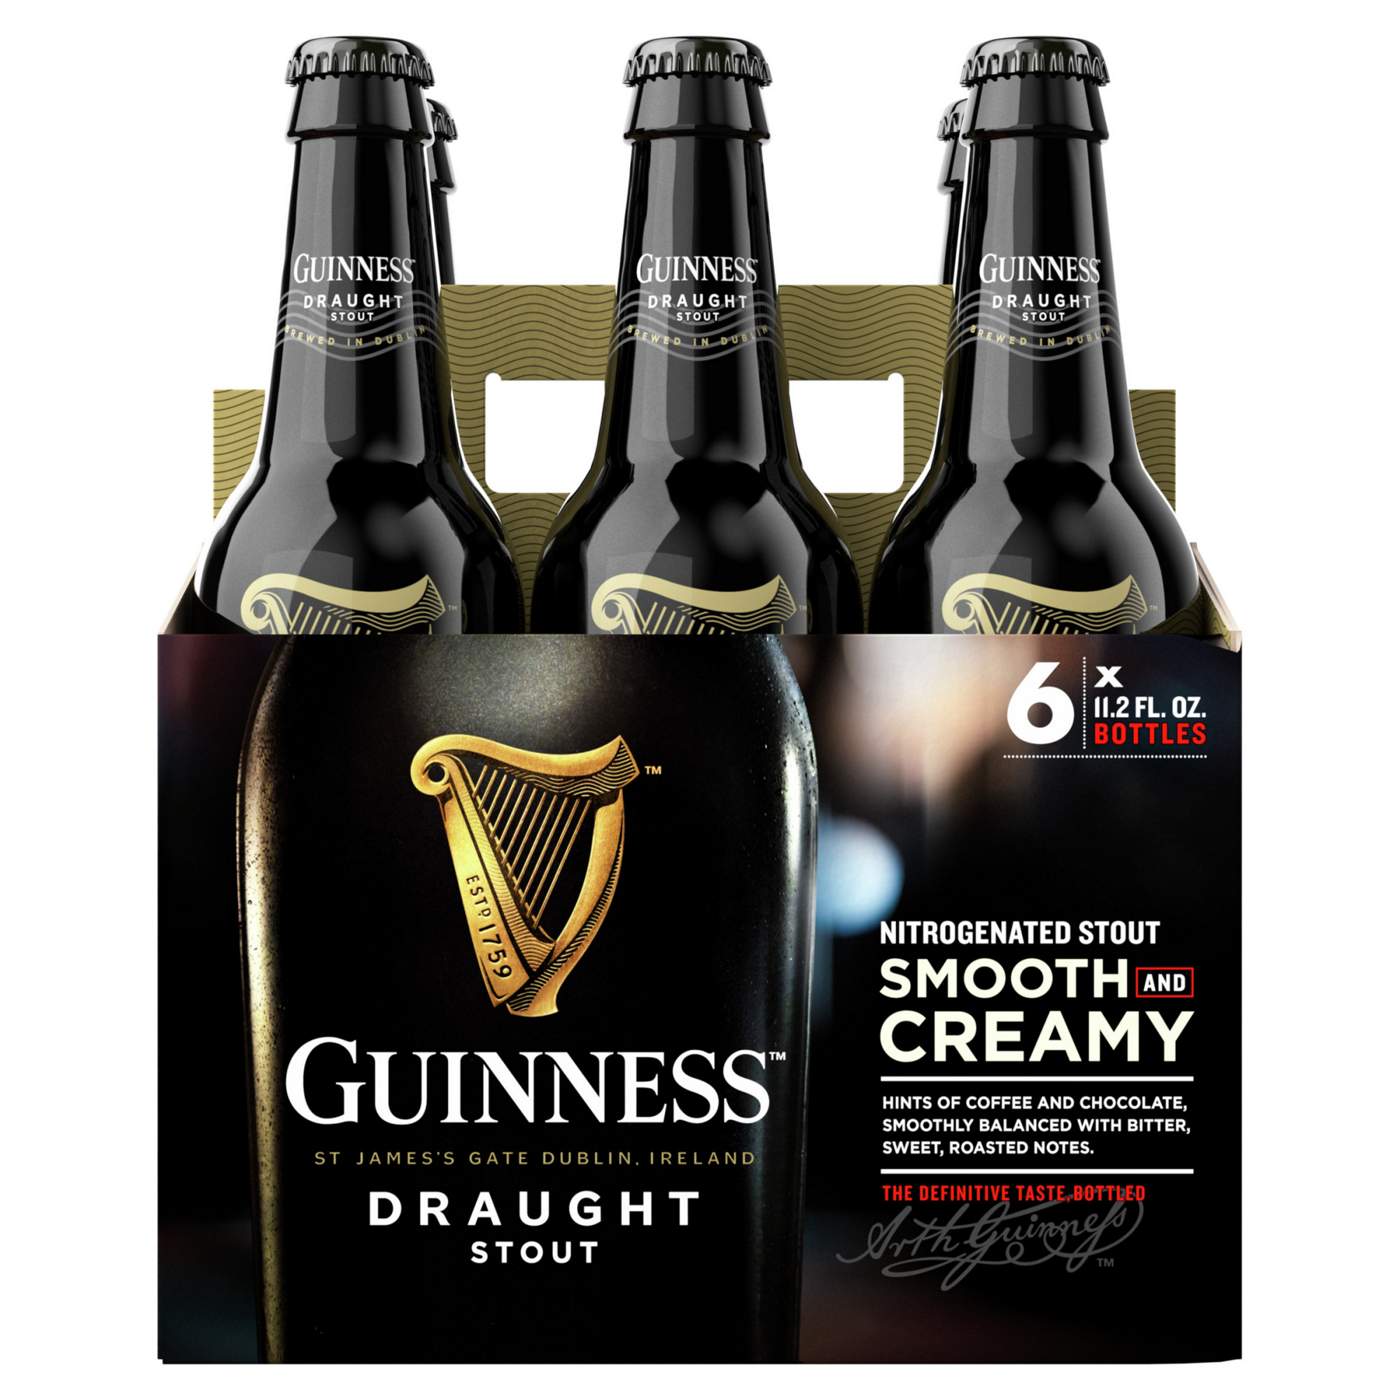 Guinness Draught Stout Beer; image 1 of 4